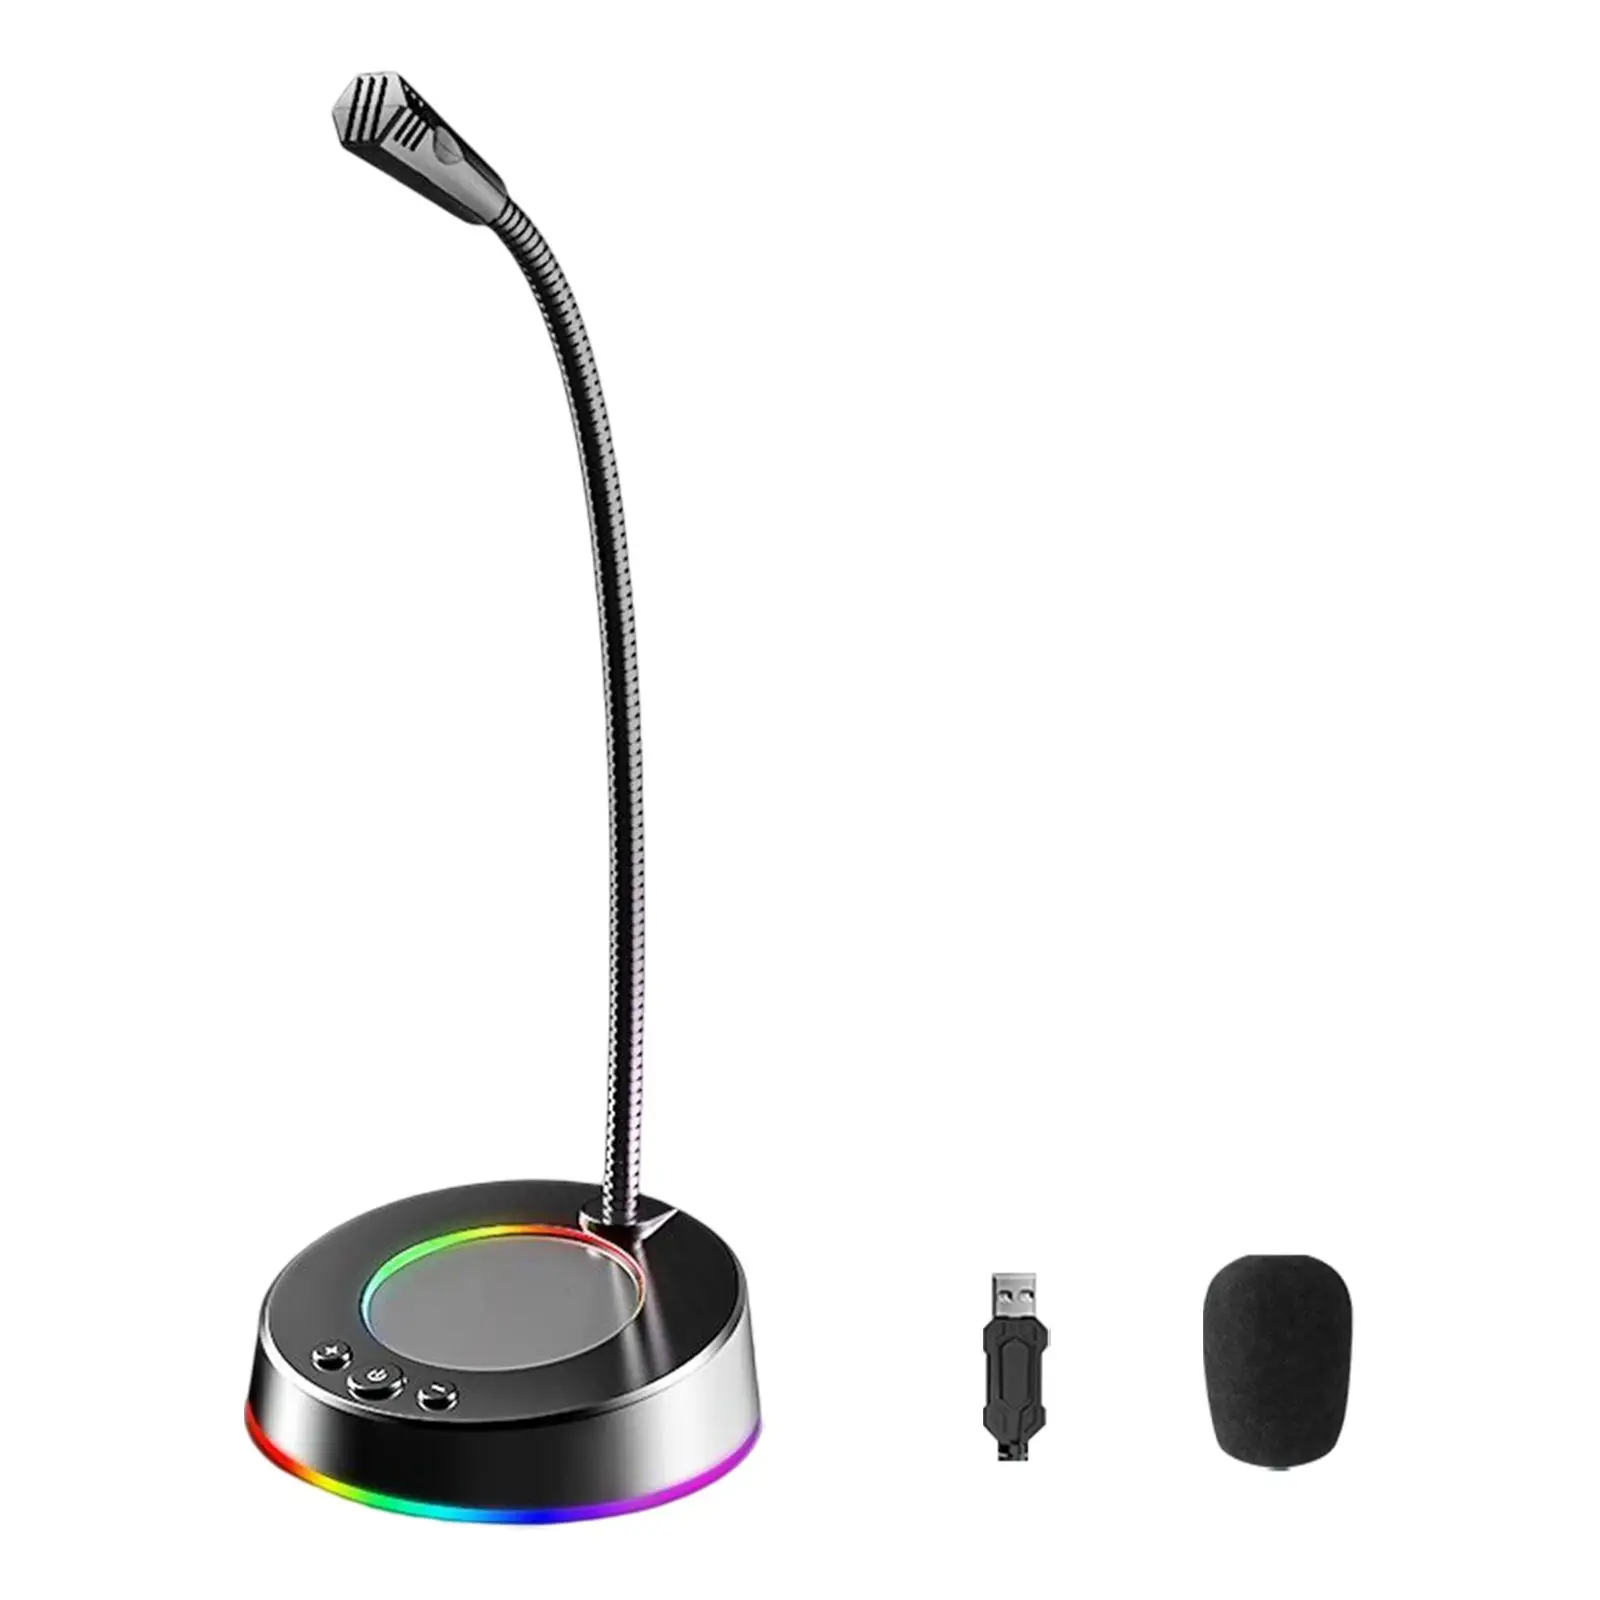 USB Computer Microphone Convenient Adjustable 360 Gooseneck Design for Meetings Lectures Youtube